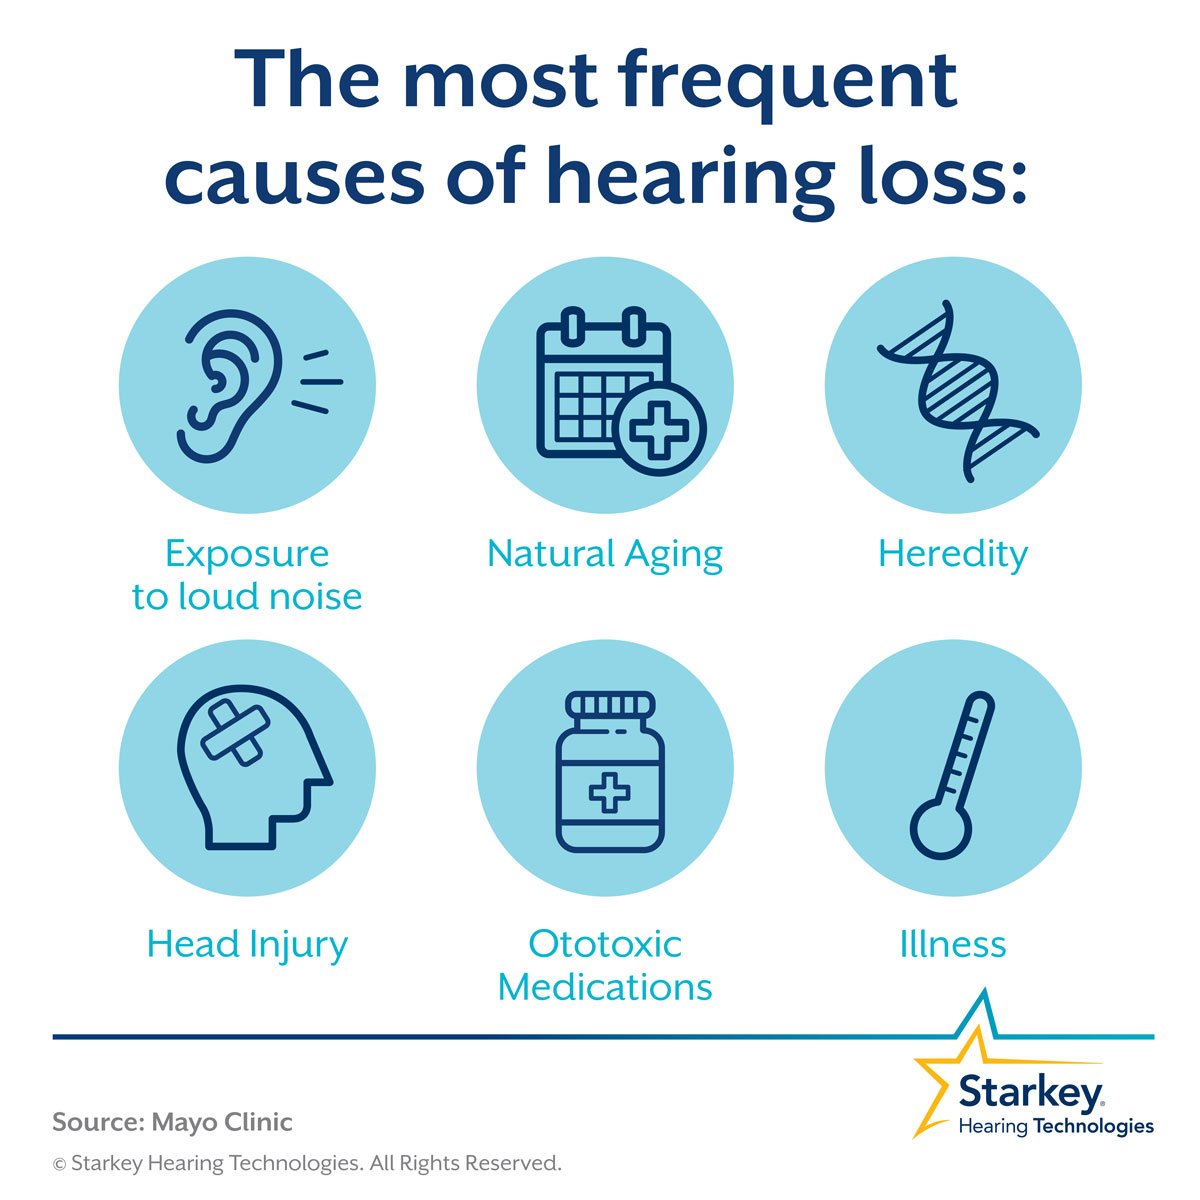 What are the causes of hearing loss